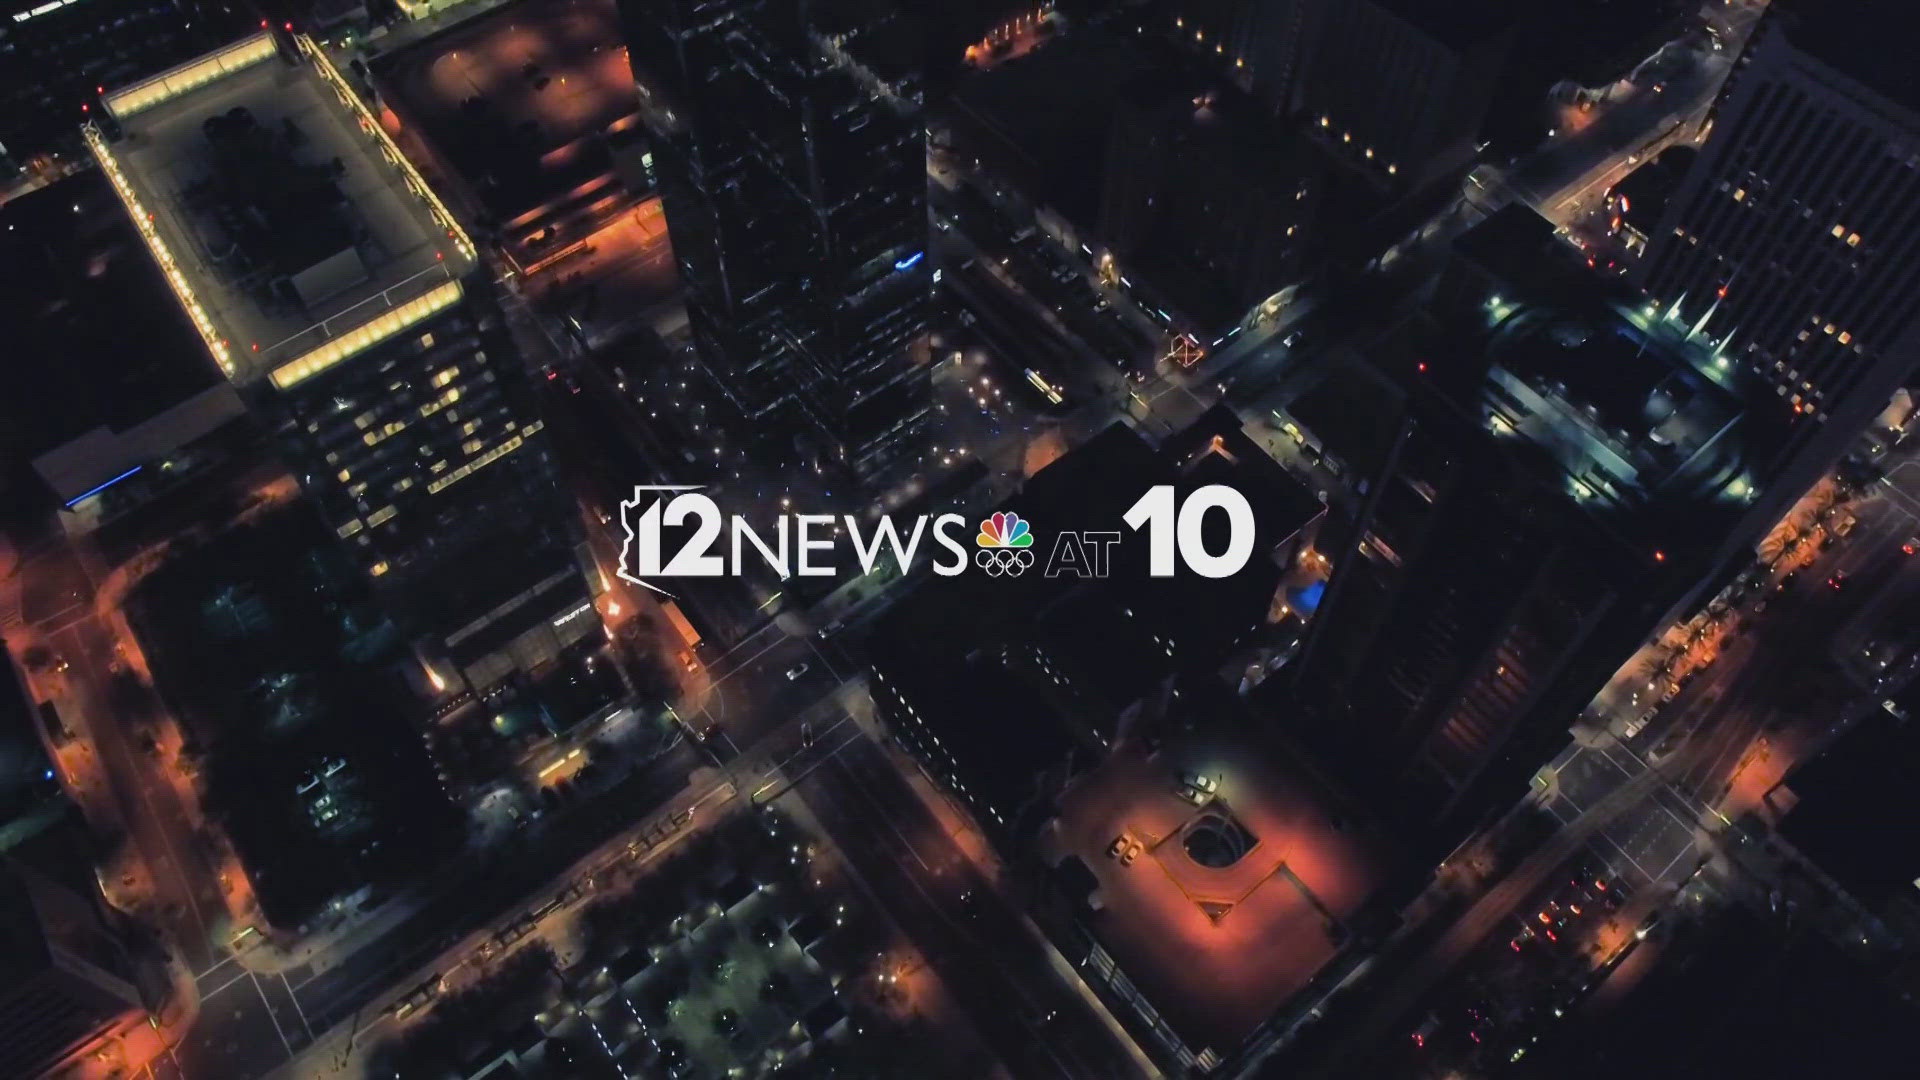 12News has your top stories for July 3.